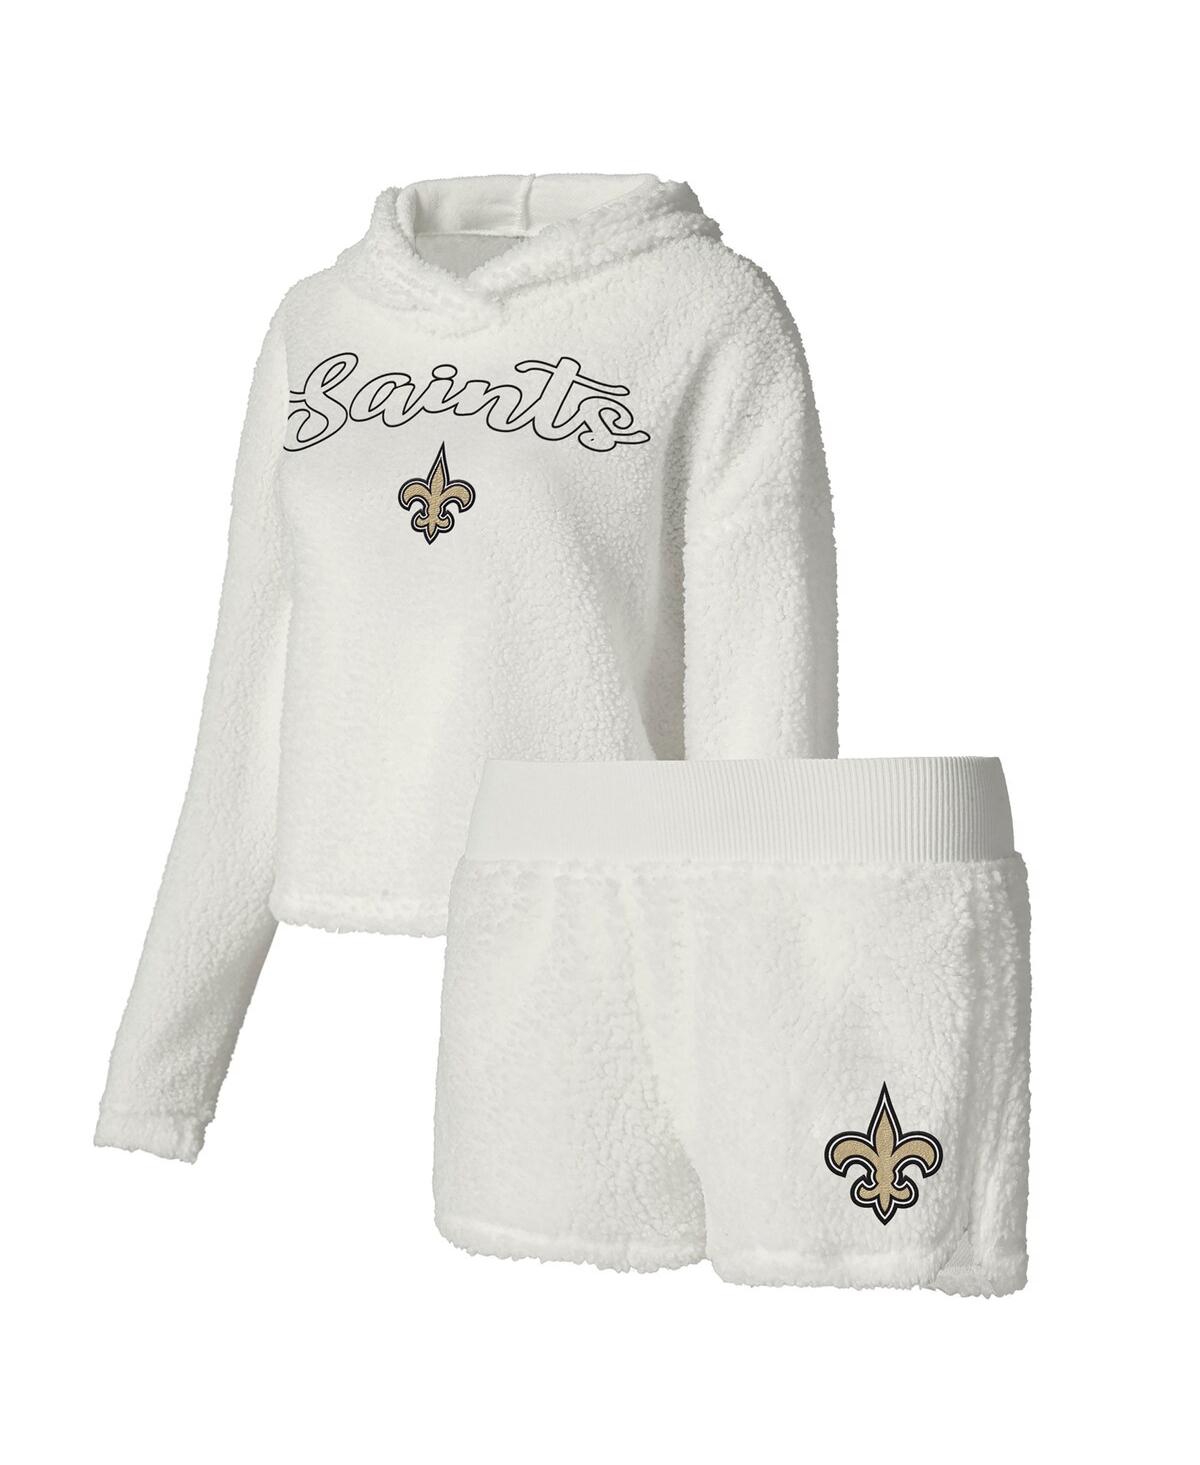 Women's Concepts Sport White New Orleans Saints Fluffy Pullover Sweatshirt and Shorts Sleep Set - White